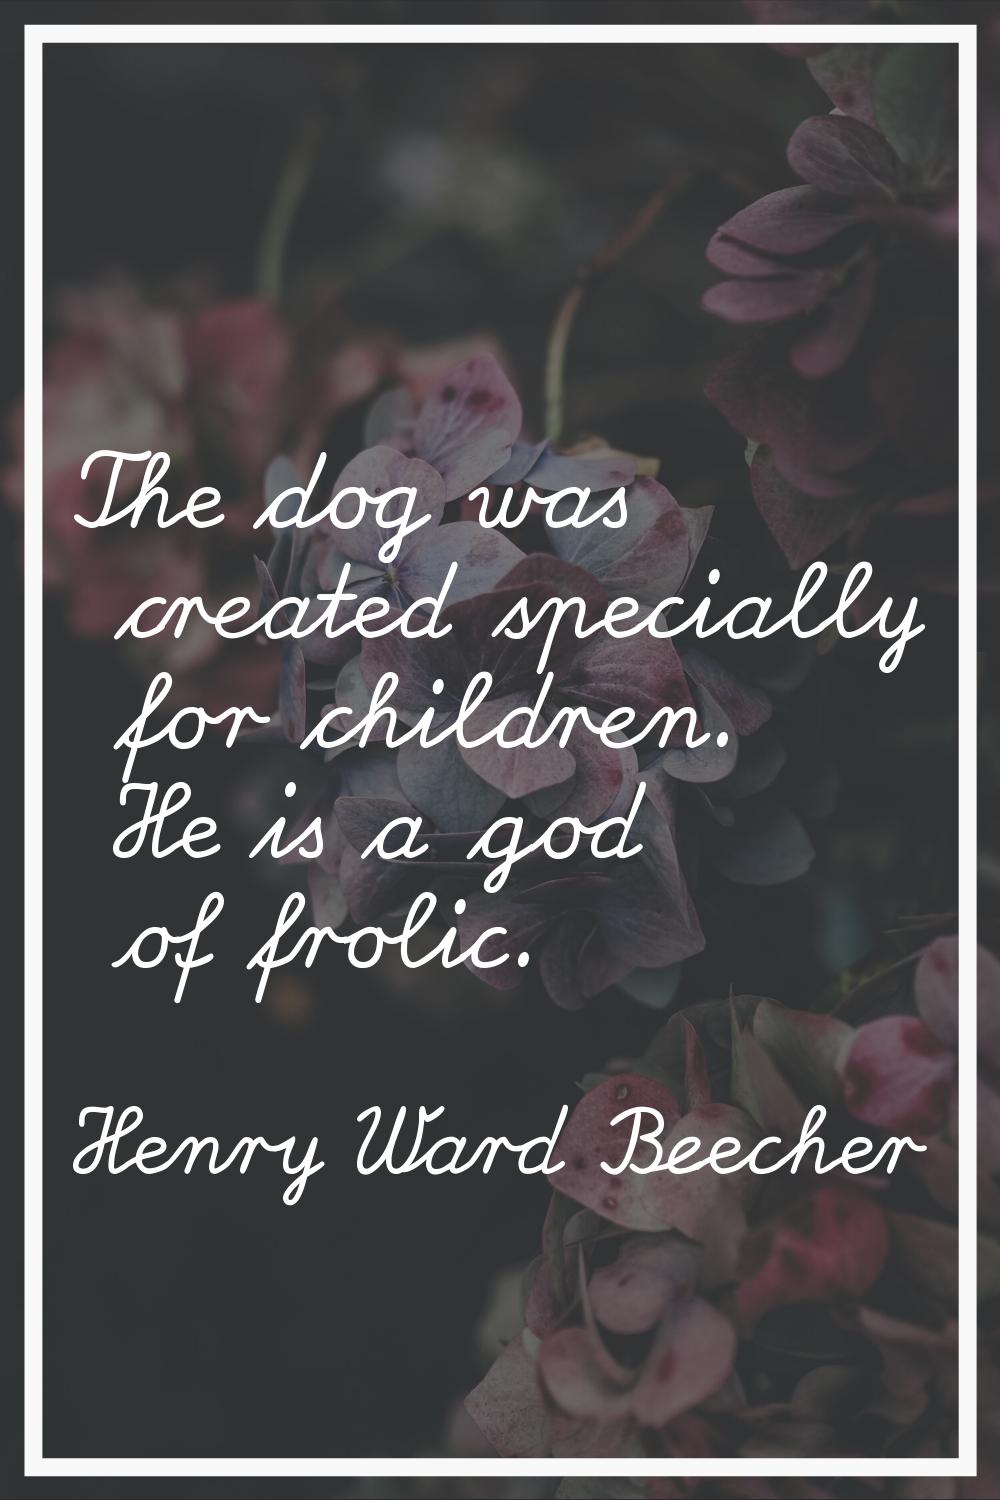 The dog was created specially for children. He is a god of frolic.